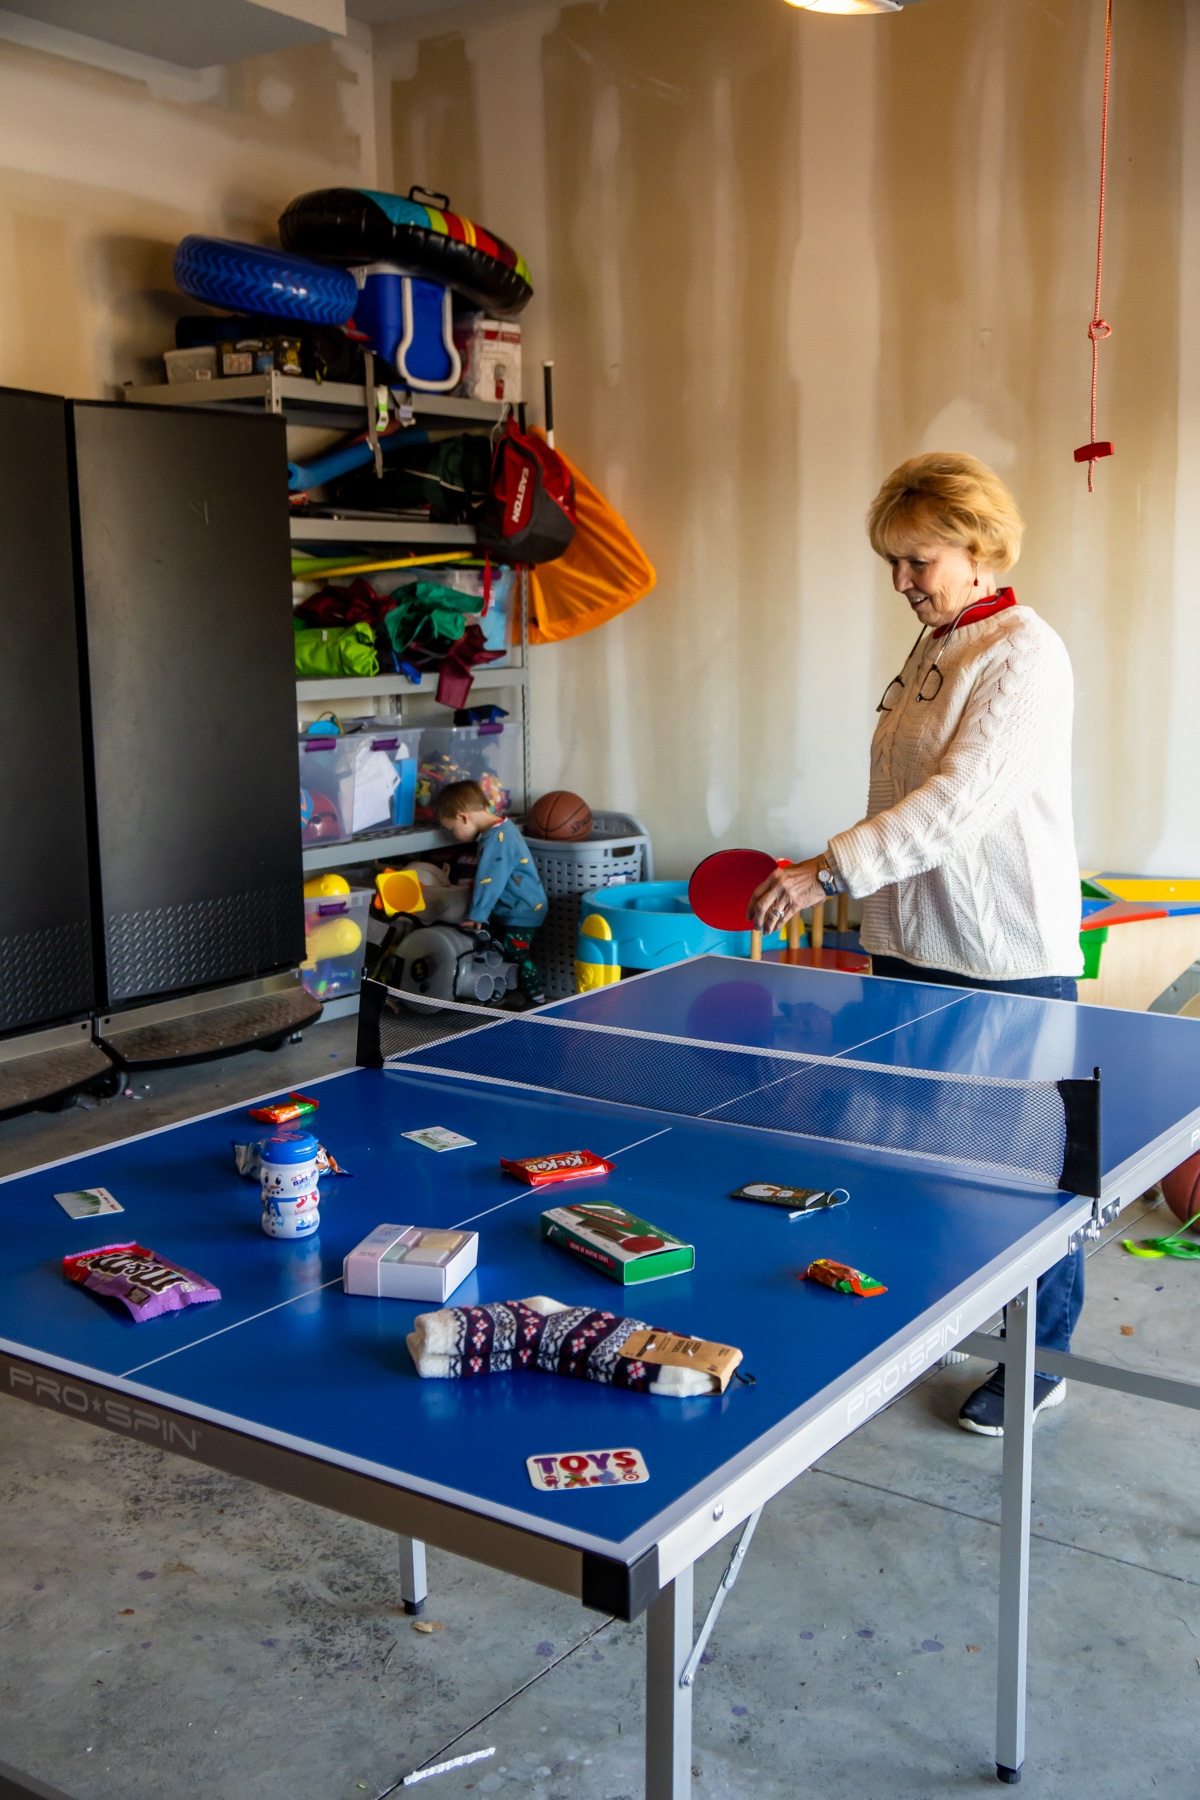 Creative Ping Pong Table Games That Aren't Ping Pong - WhatLauraLoves